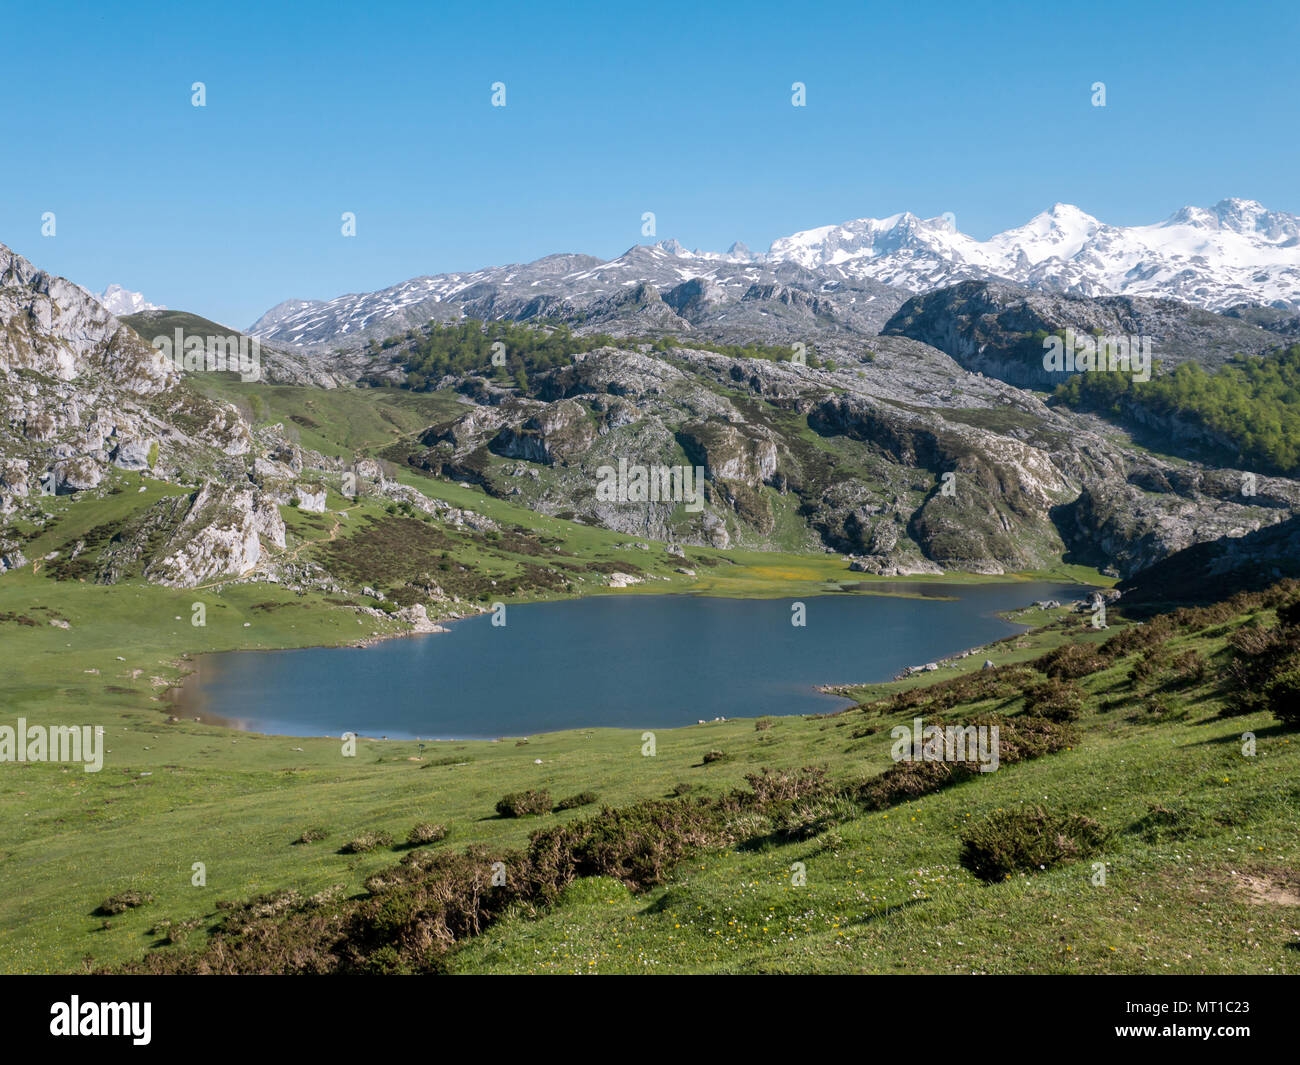 View from above to the Ercina mountain lake near Covadonga, Asturias, Spain. Spring in the mountains and snow peaks. Stock Photo